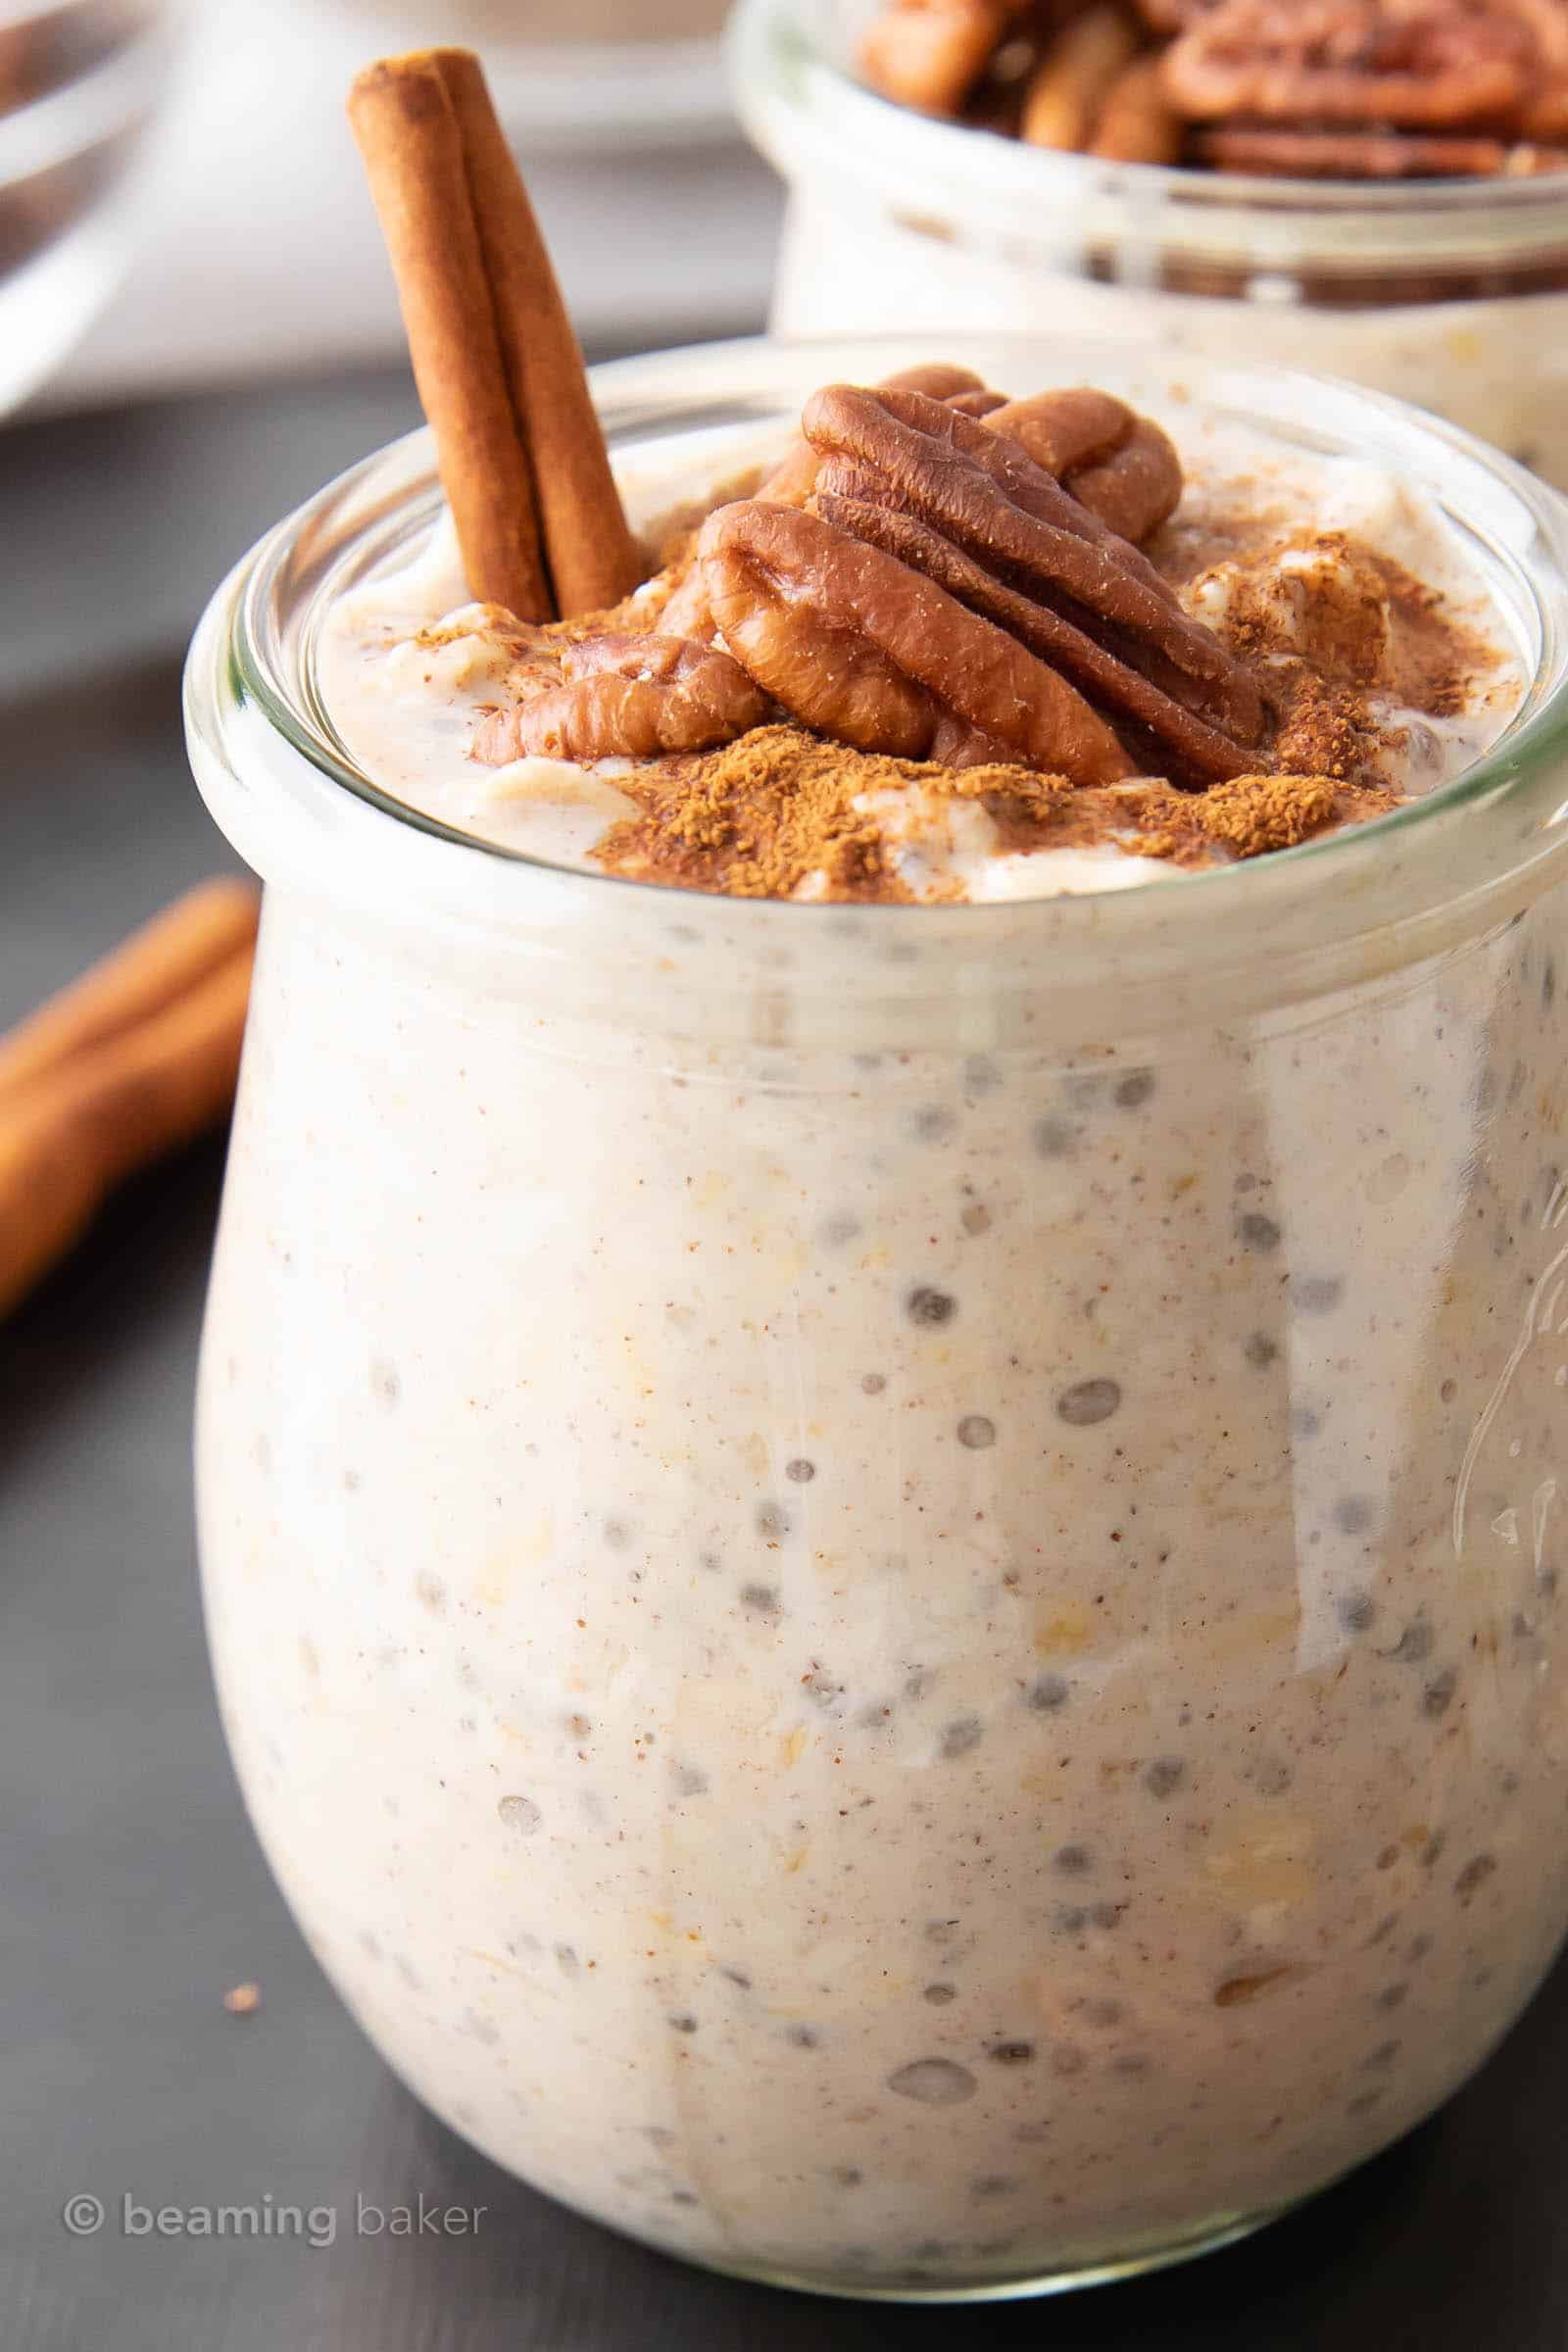 Super closeup jar of maple pecan overnight oats topped with cinnamon stick and pecans